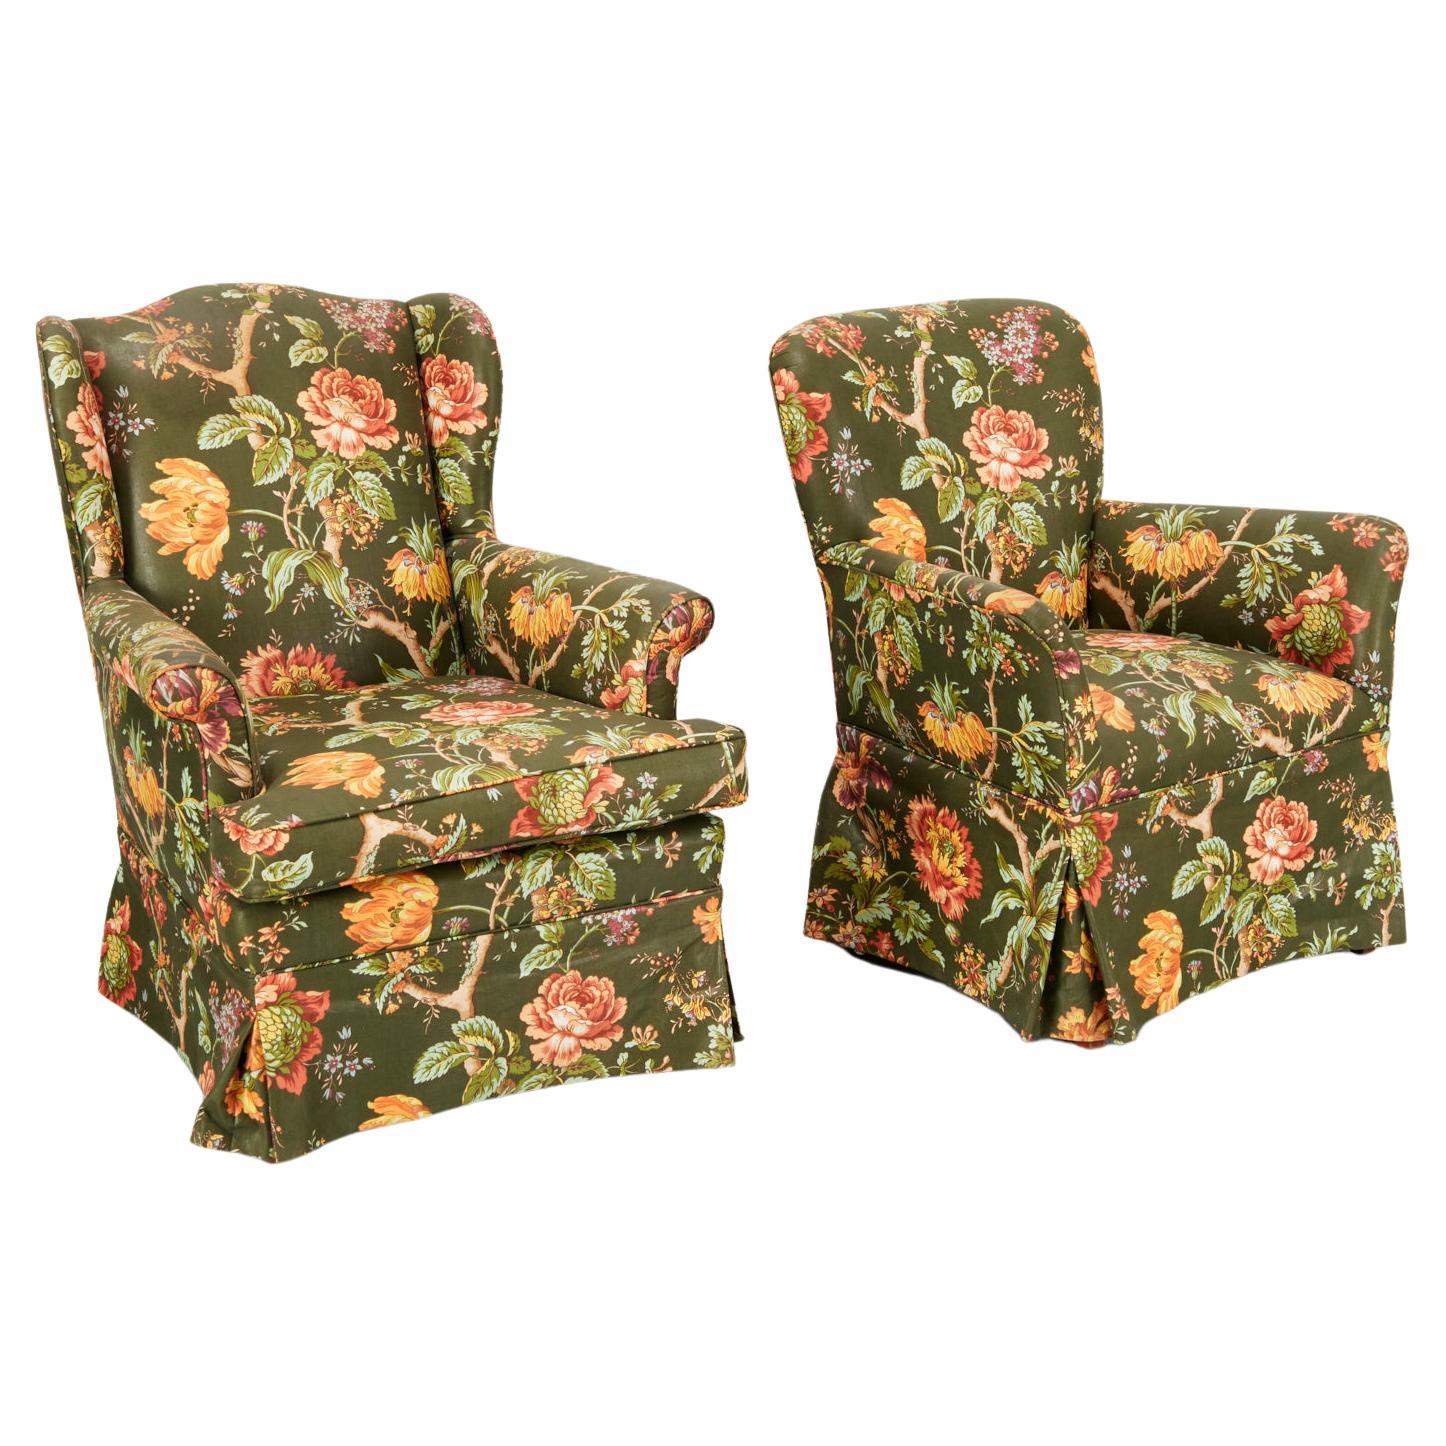 Custom Cotton Glazed Floral Chintz Upholstered His and Hers Lounge Chairs